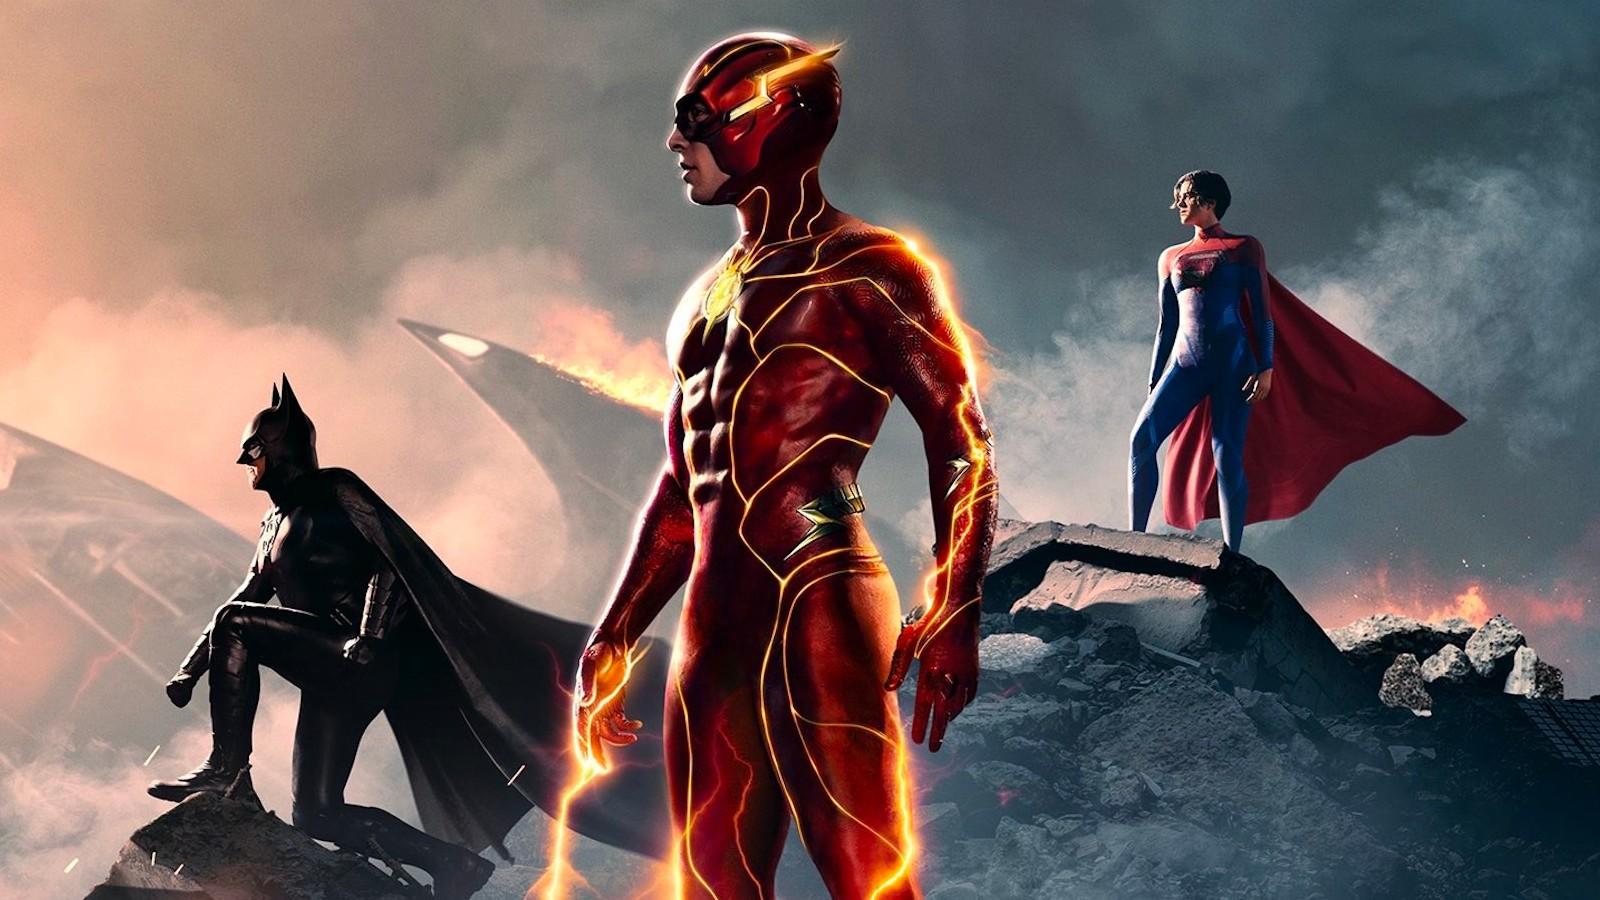 What to watch: Here's the best superhero movie of the summer